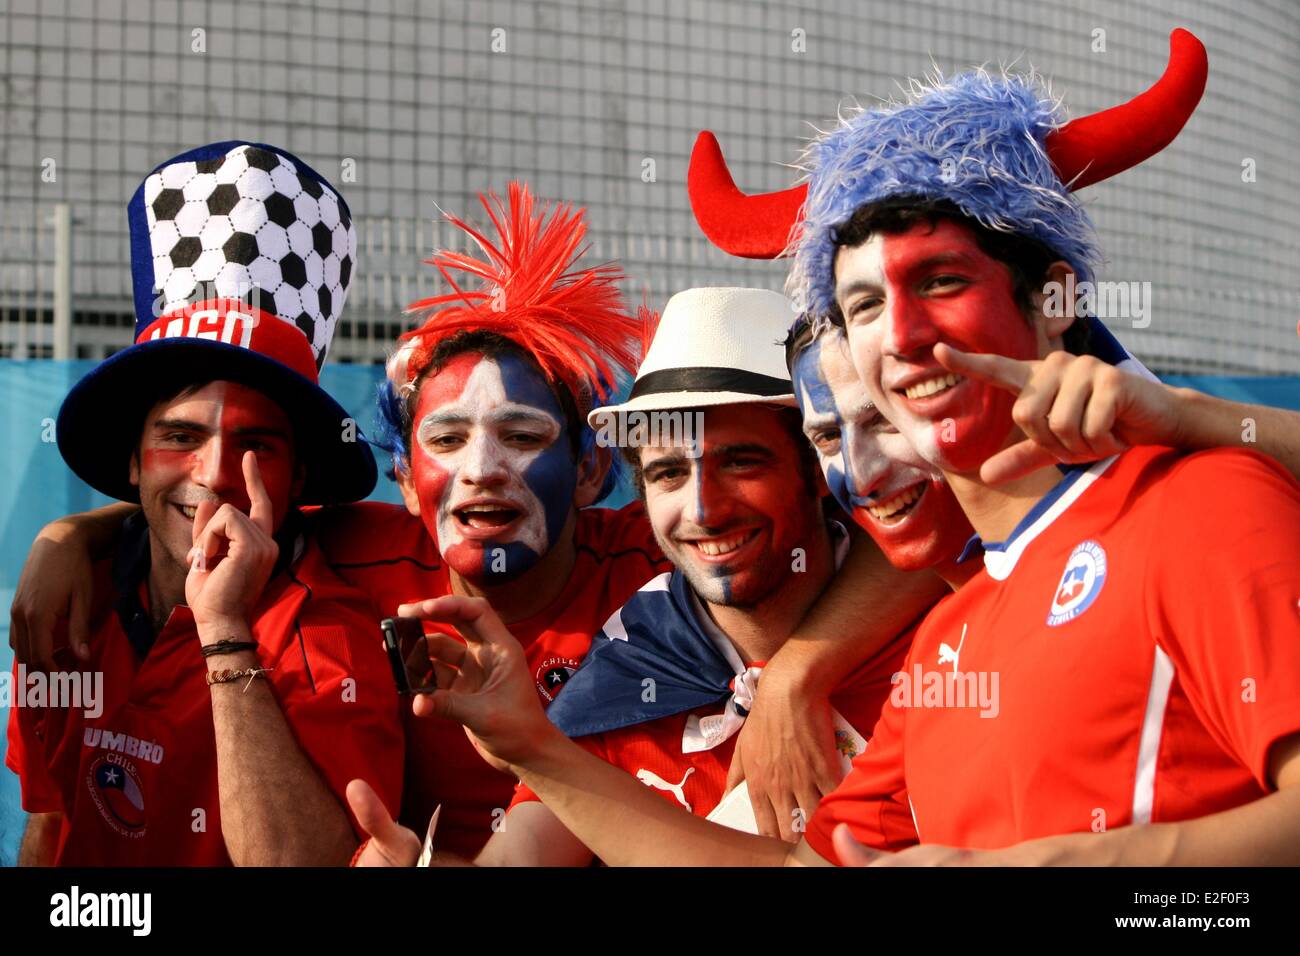 Rio de Janeiro, Brazil. 18th June, 2014. 2014 FIFA World Cup Brazil. Chilean fans arriving at Maracanã to watch the match Spain x Chile. Chile won 2-0, eliminating the current world champions from the competition. Rio de Janeiro, Brazil, 18th June, 2014. Credit:  Maria Adelaide Silva/Alamy Live News Stock Photo